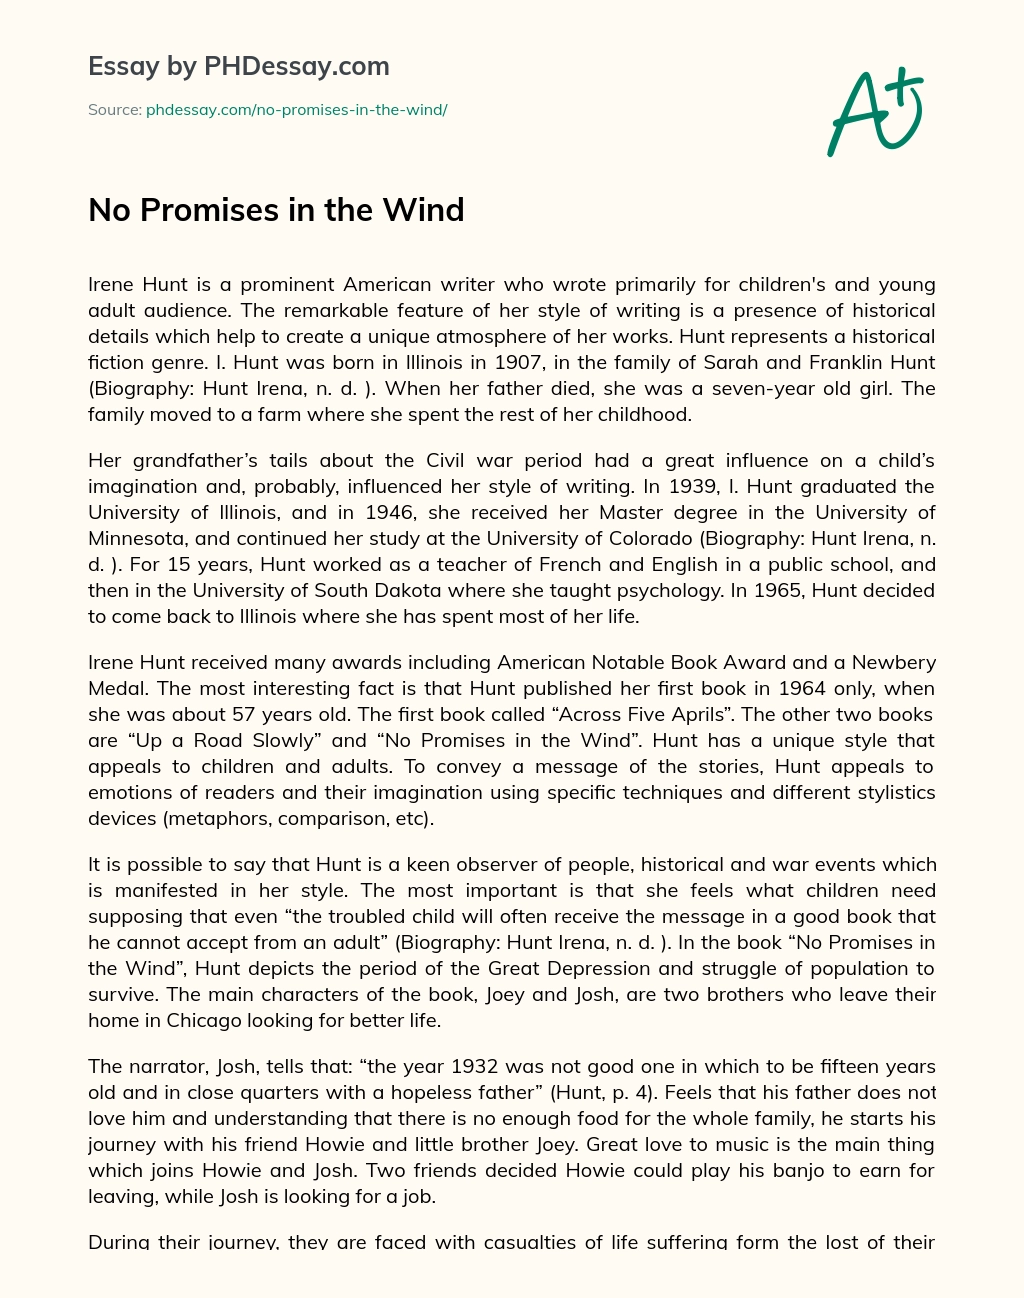 No Promises in the Wind essay